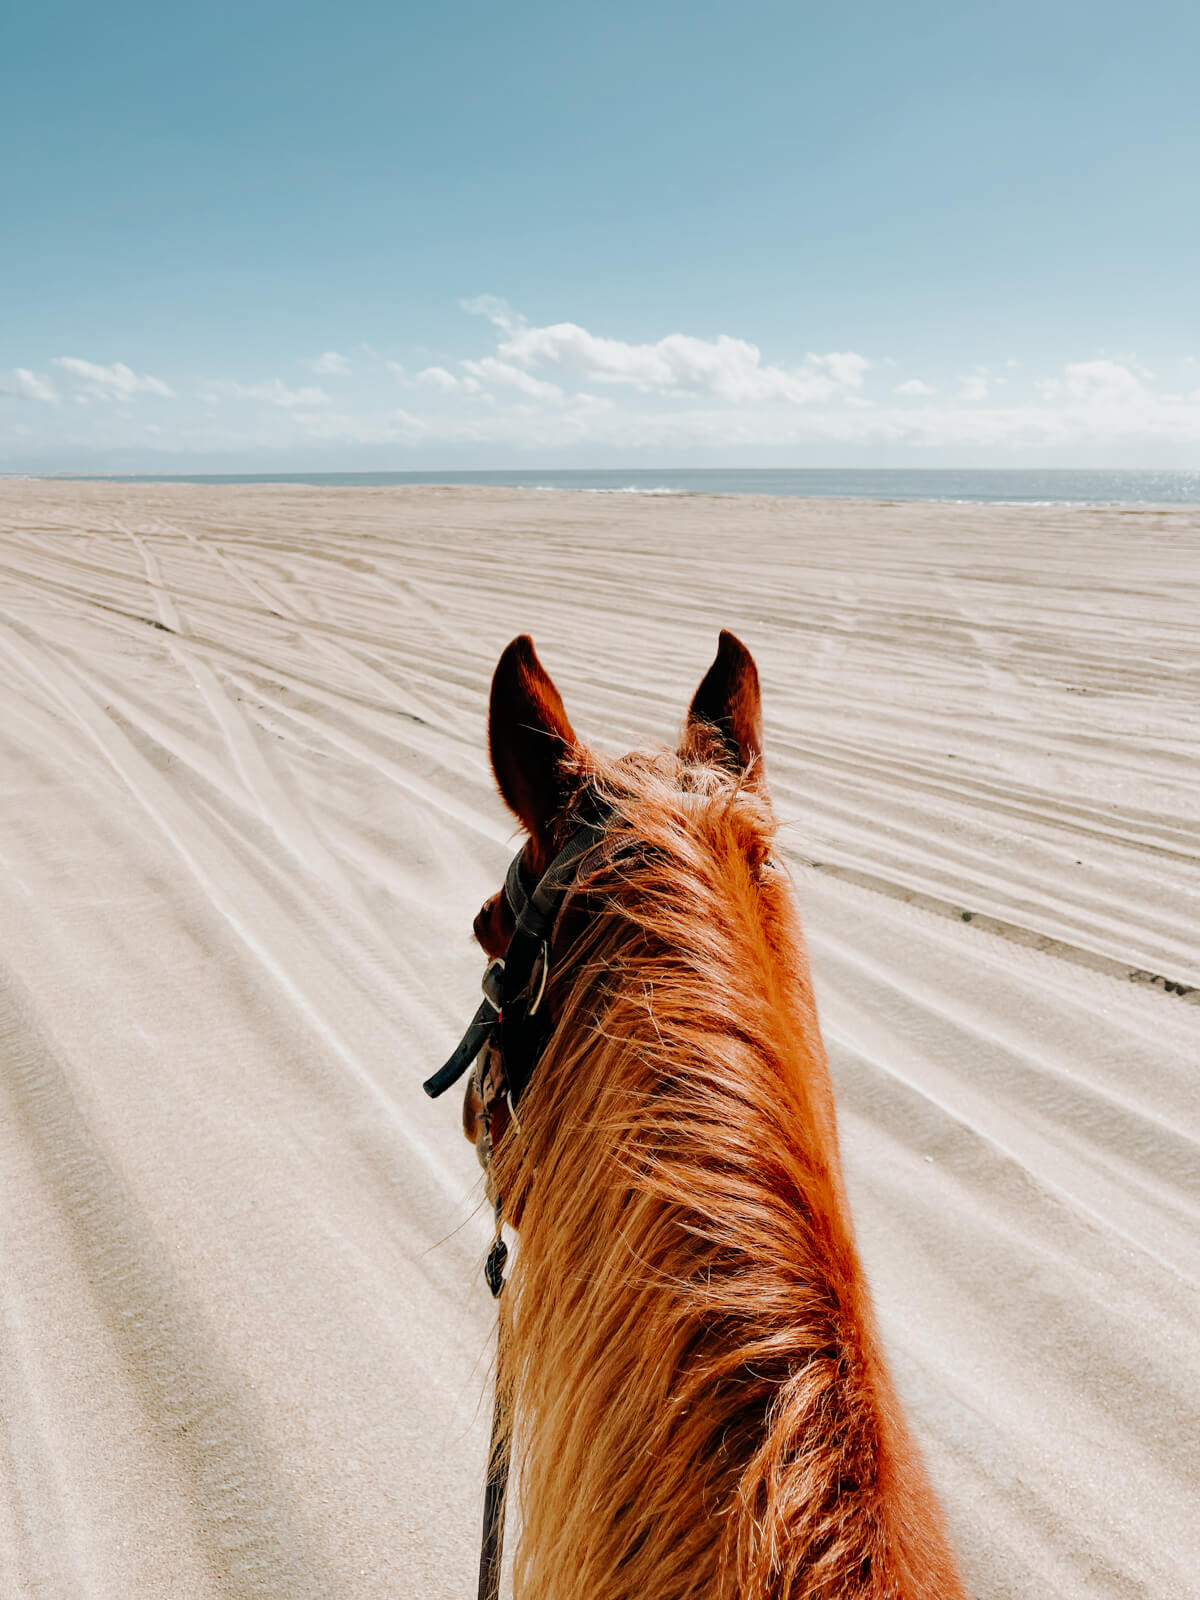 Horseback riding on the Outer Banks